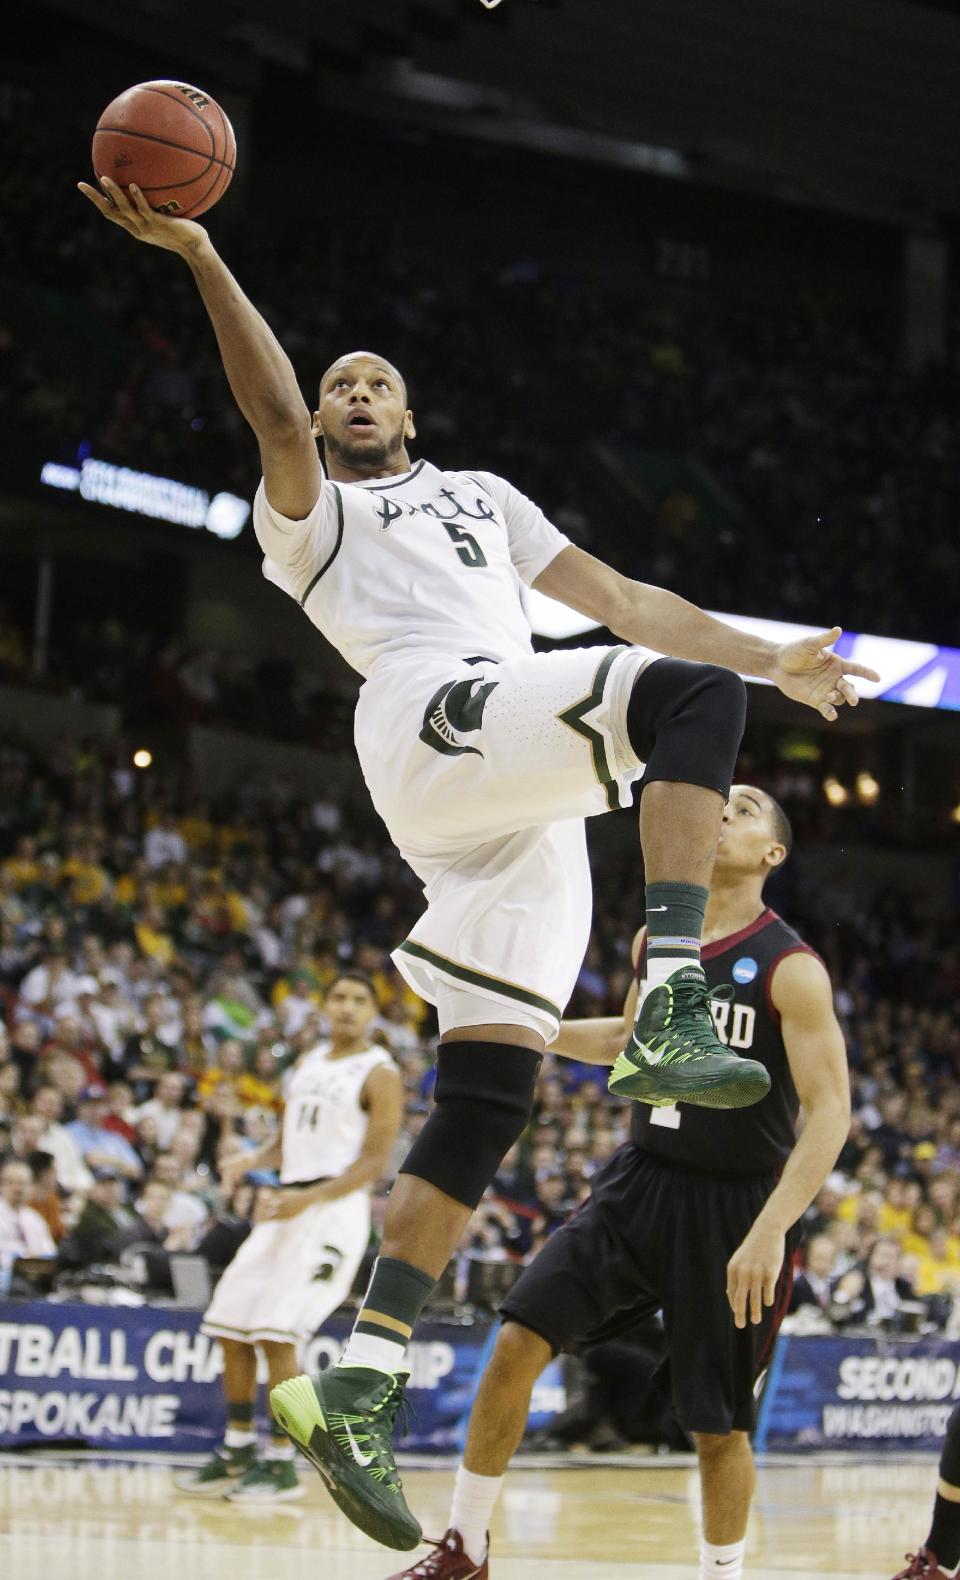 Michigan State’s Adreian Payne (5) shoots a layup in the first half during the third-round game of the NCAA men's college basketball tournament against Harvard in Spokane, Wash., Saturday, March 22, 2014. (AP Photo/Young Kwak)